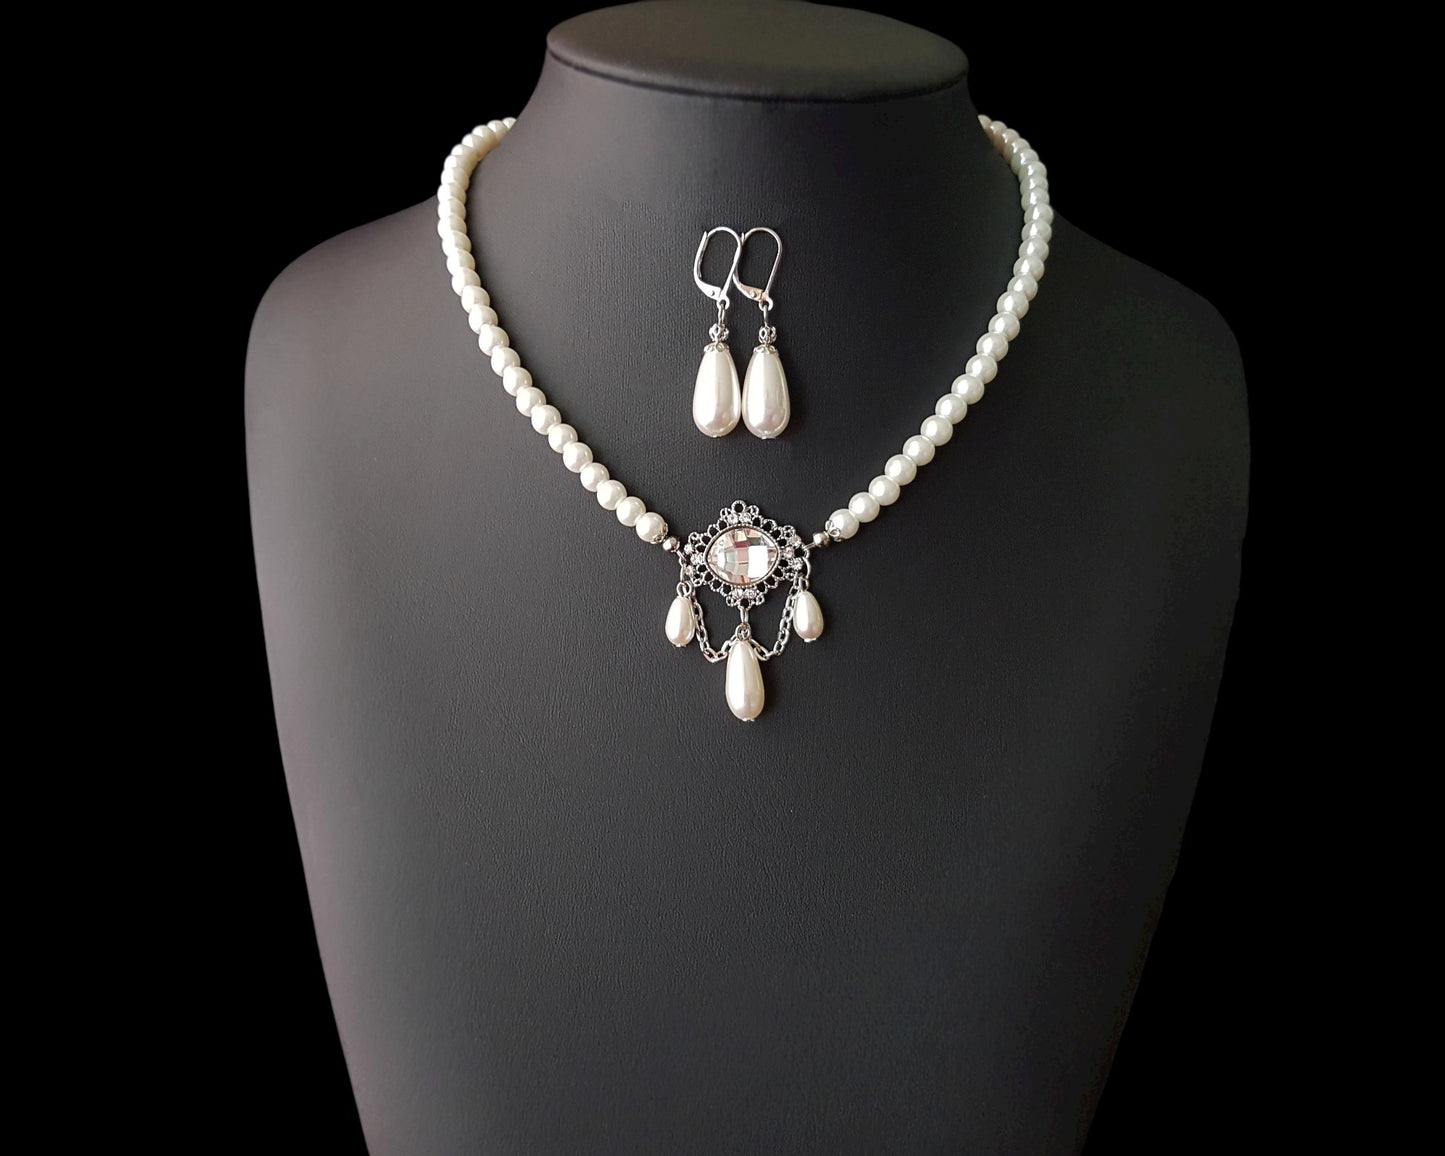 Victorian Style Pearl Crystal Necklace and Earrings Set with white pearl necklace with large clear crystal and three dangling drop pearls and long back chain with another pearl drop. The matching earrings are drop shaped pearls, displayed on black. 